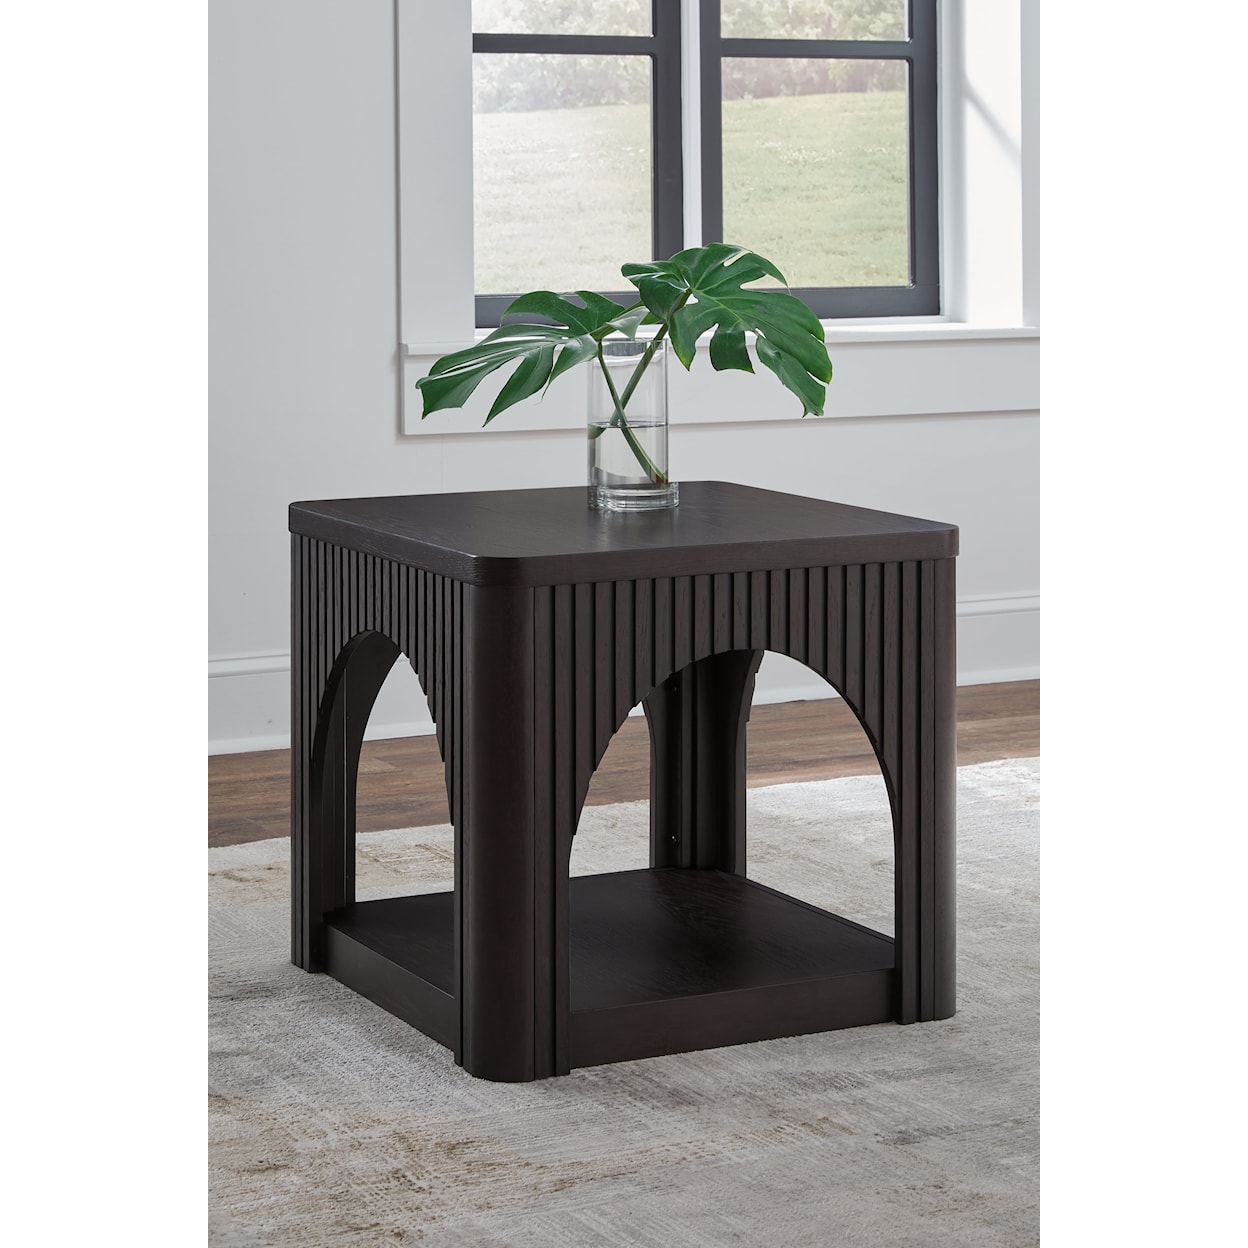 Signature Design by Ashley Yellink Coffee Table and 2 End Tables